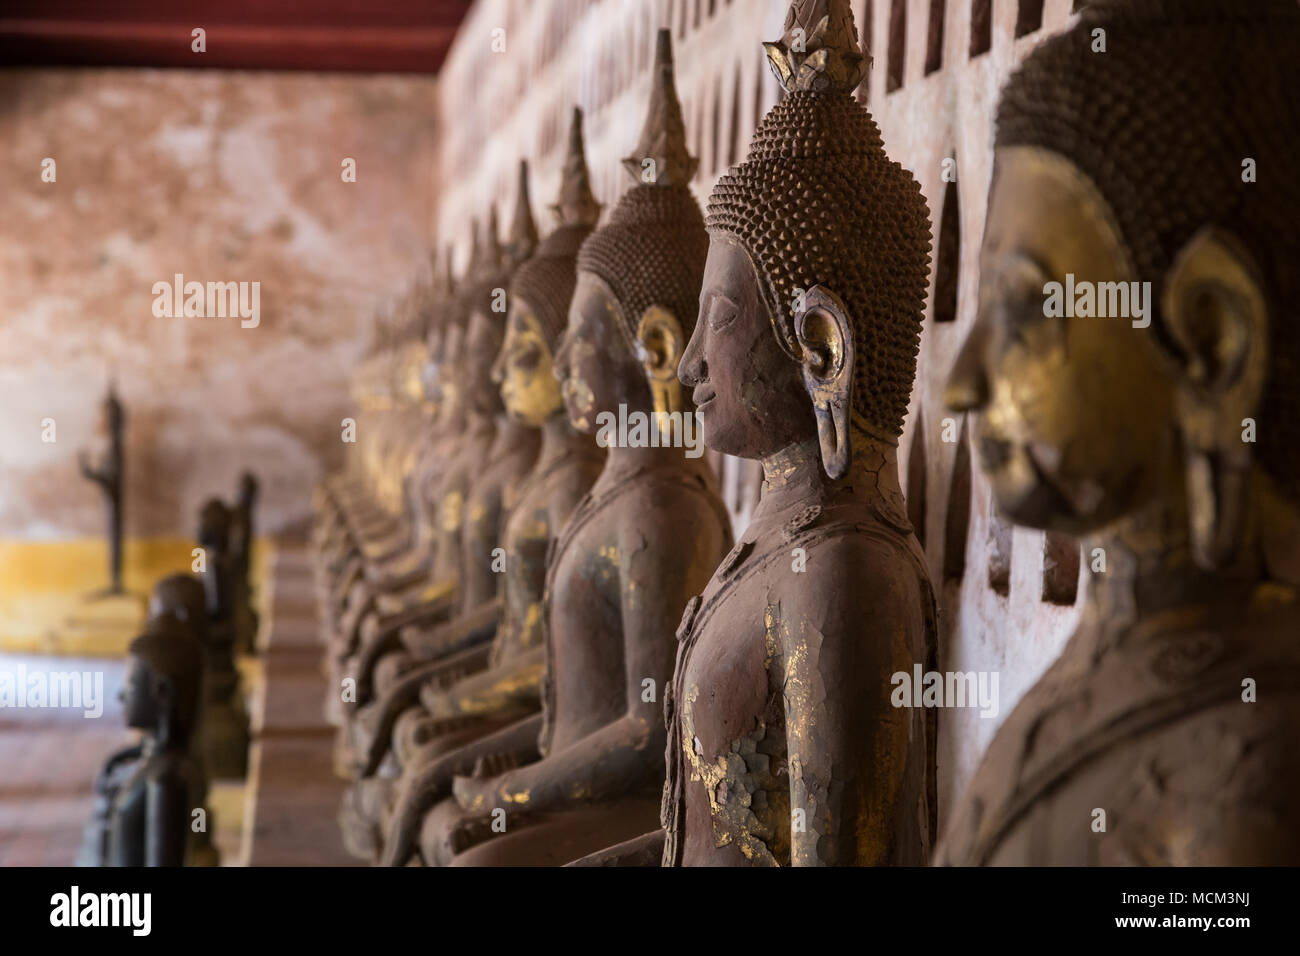 View of many old and aged Buddha statues at the Wat Si Saket (Sisaket) temple's cloister in Vientiane, Laos. Shallow depth of field. Stock Photo